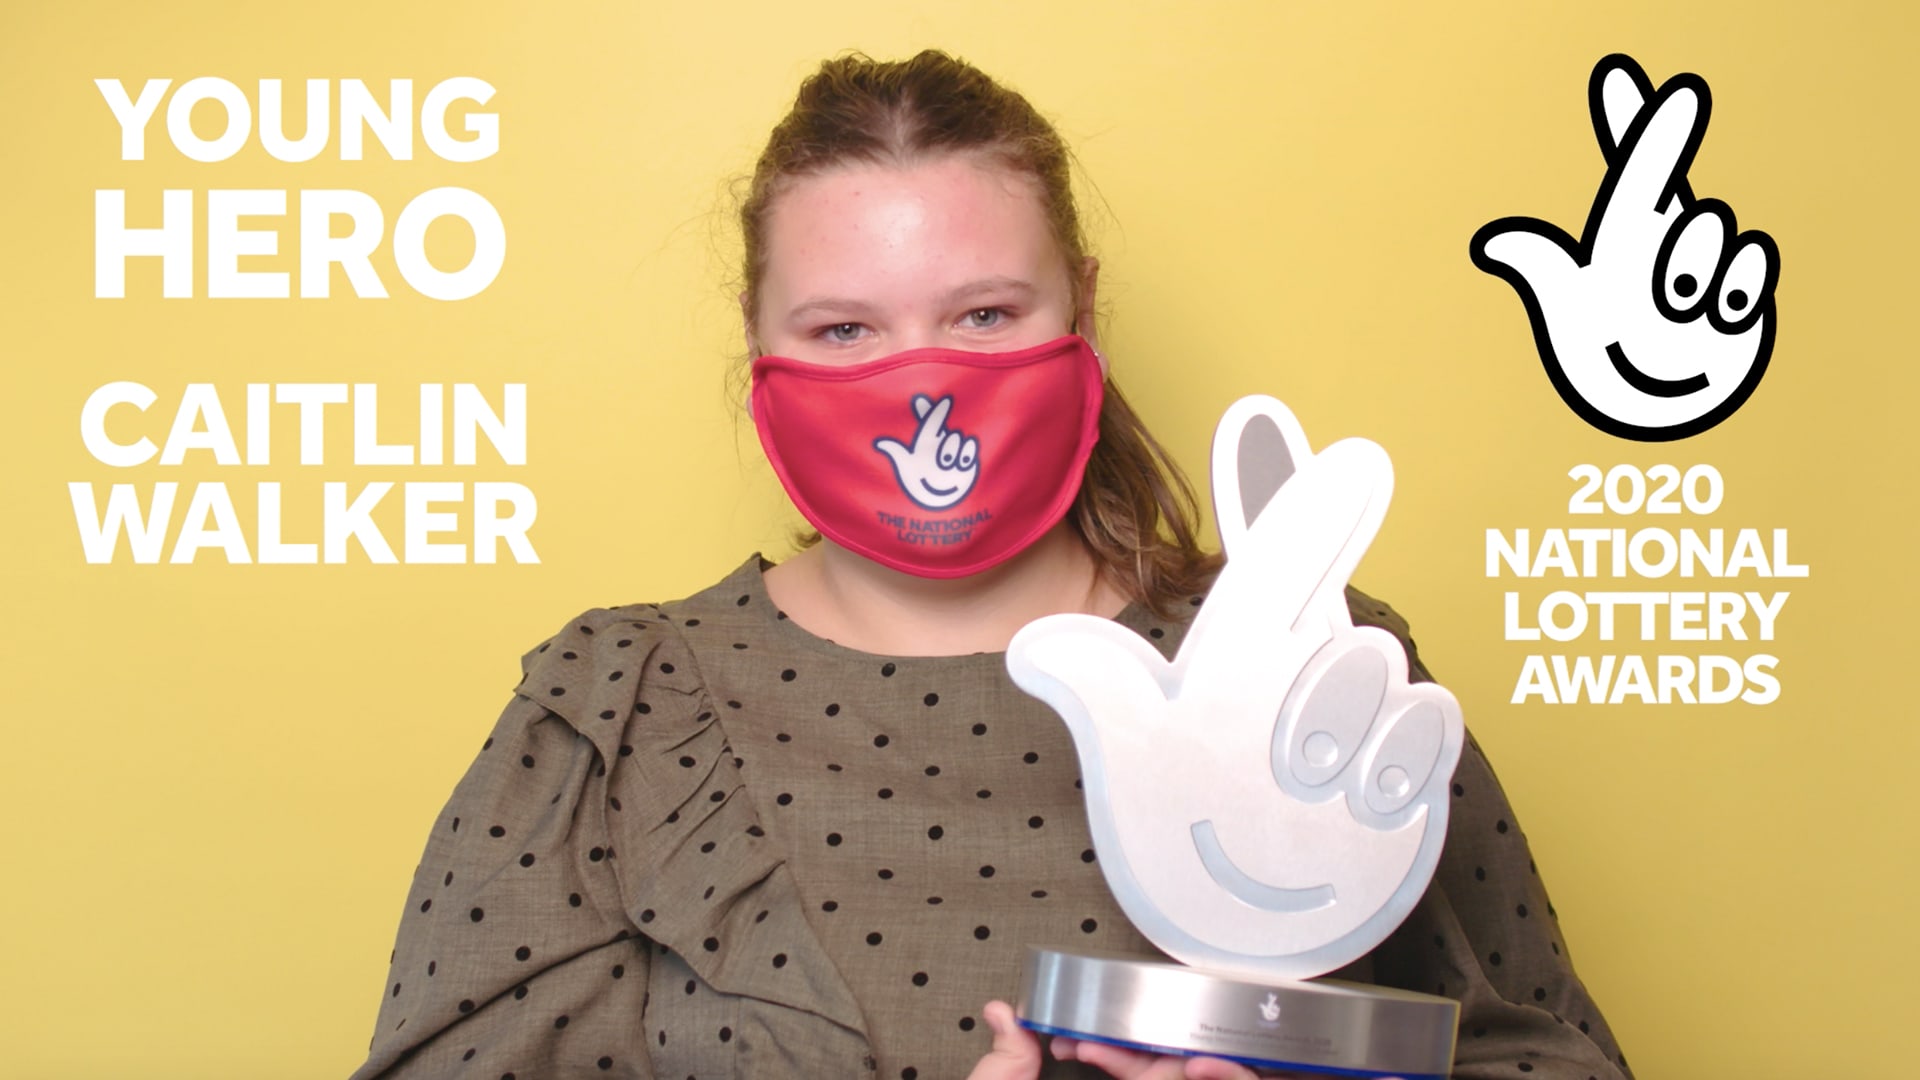 Young Hero Award, a video by Bruizer Video & Film Agency for The National Lottery